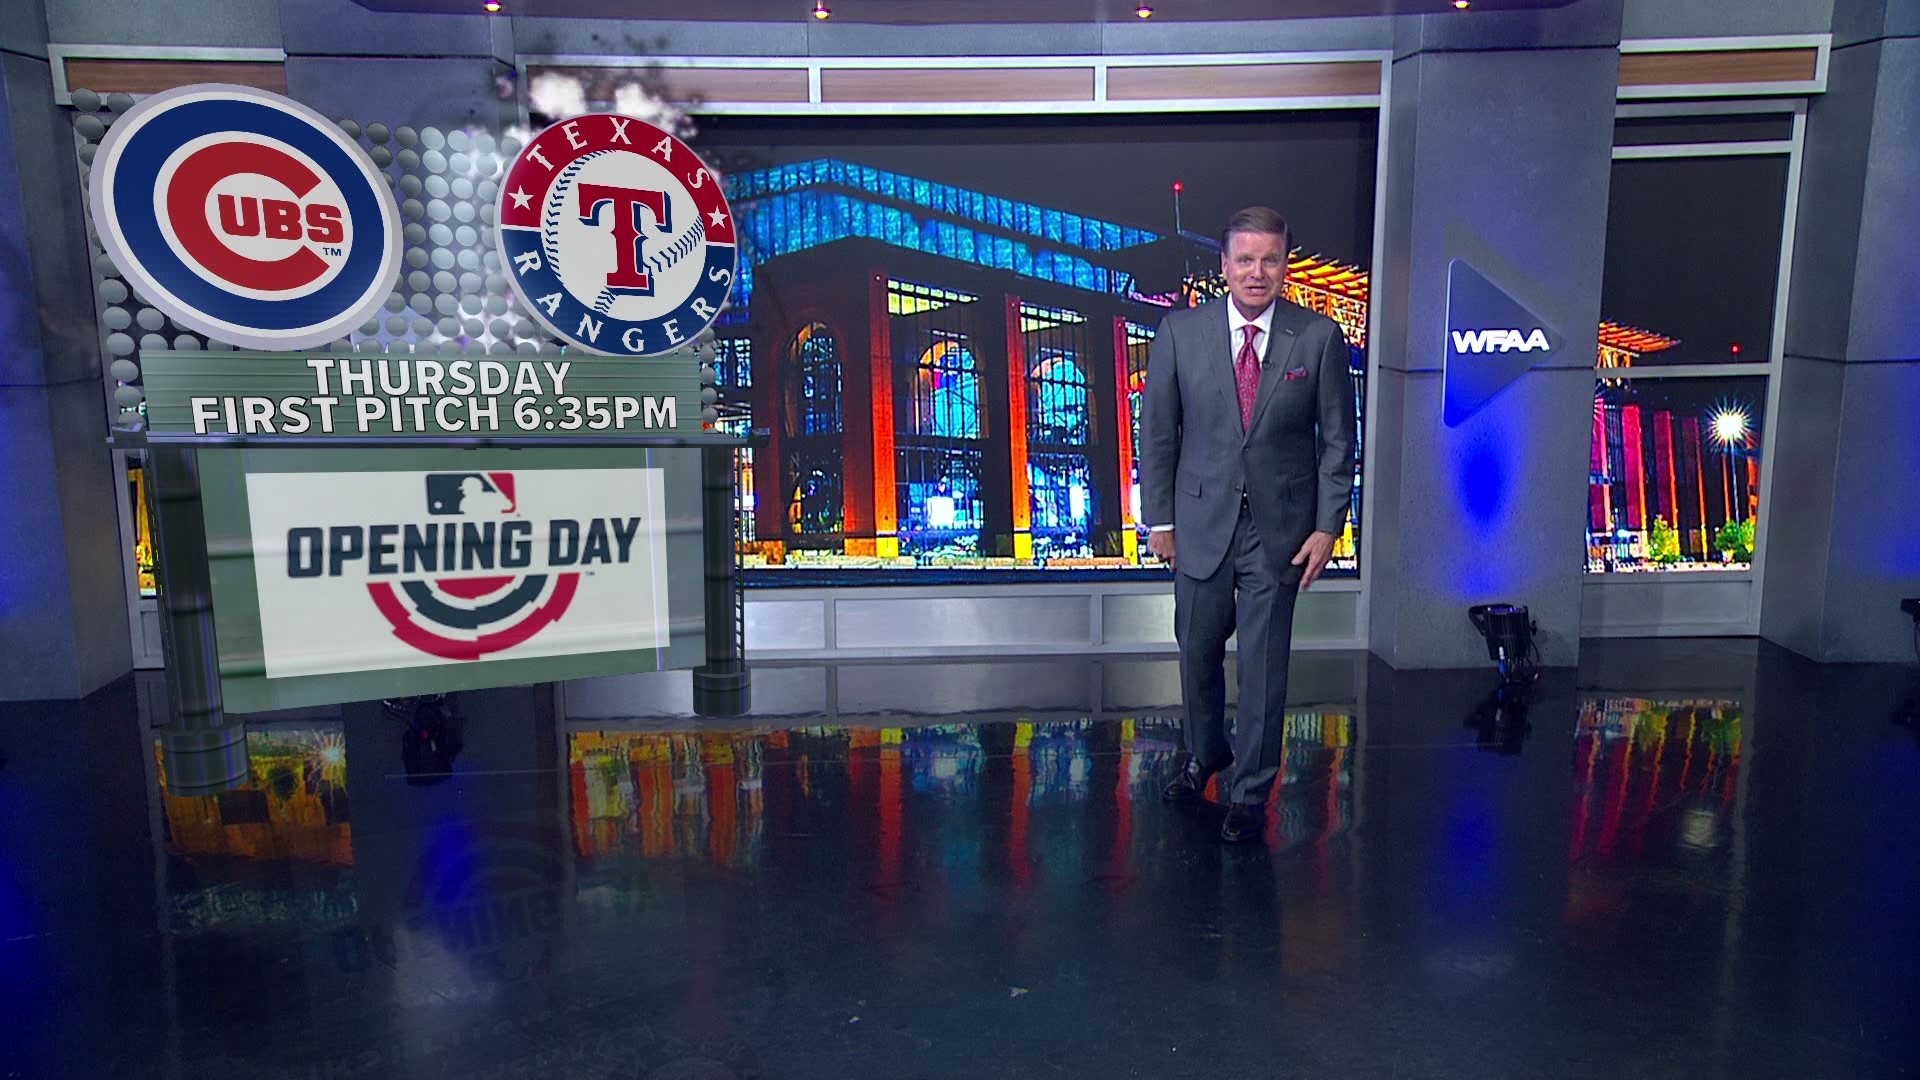 The first pitch between the Texas Rangers and the Chicago Cubs will be at 6:35 p.m. Thursday.